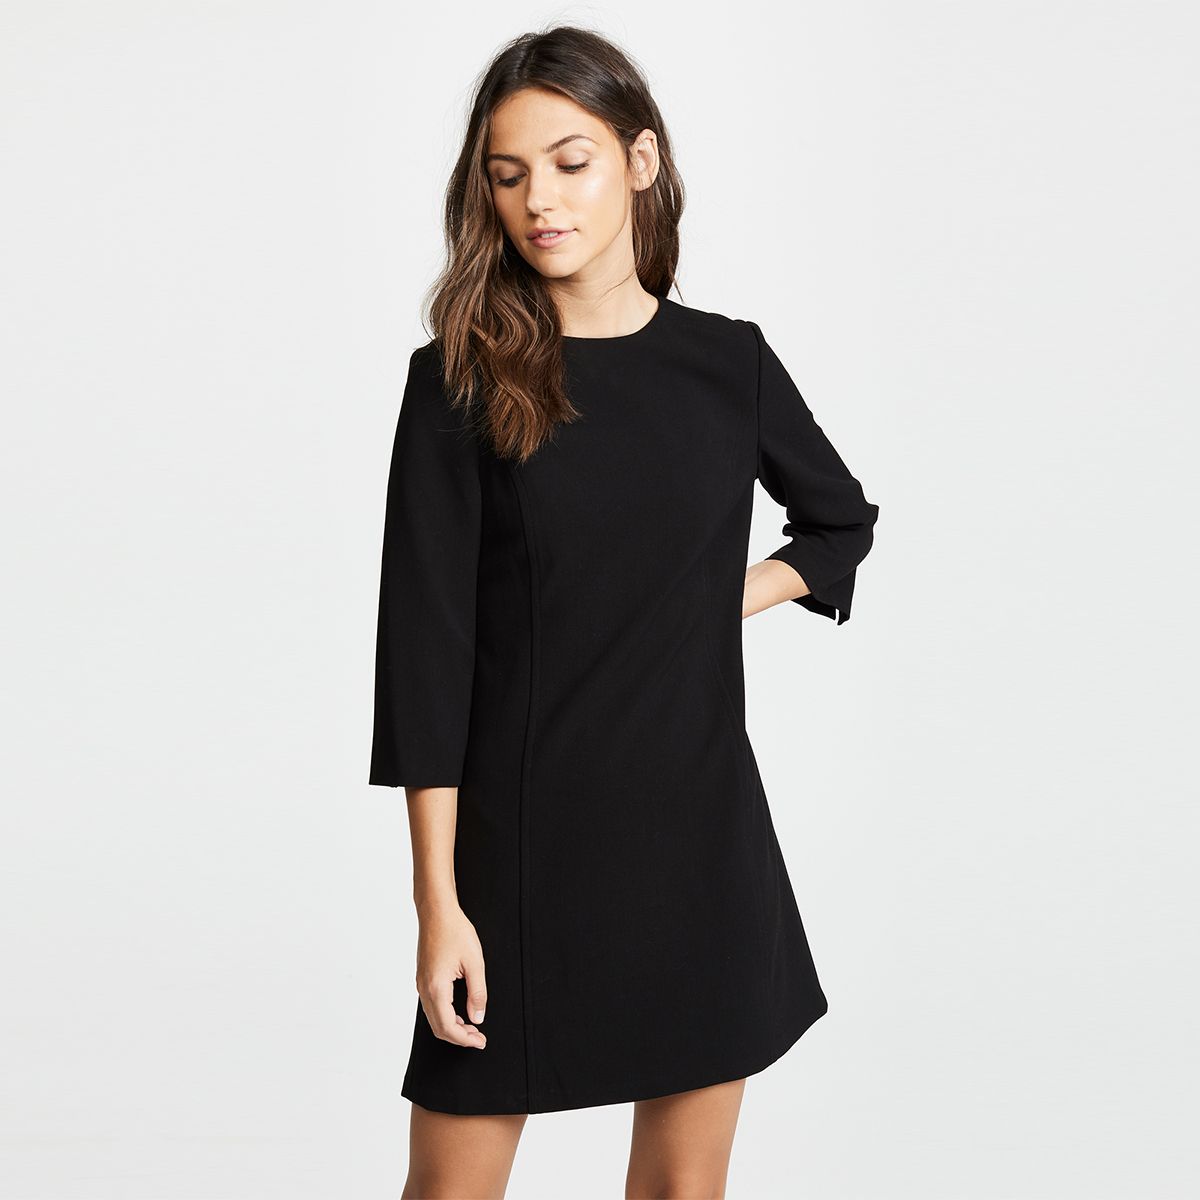 What's a Shift Dress, and How's It Different From a Sheath? | Who What Wear